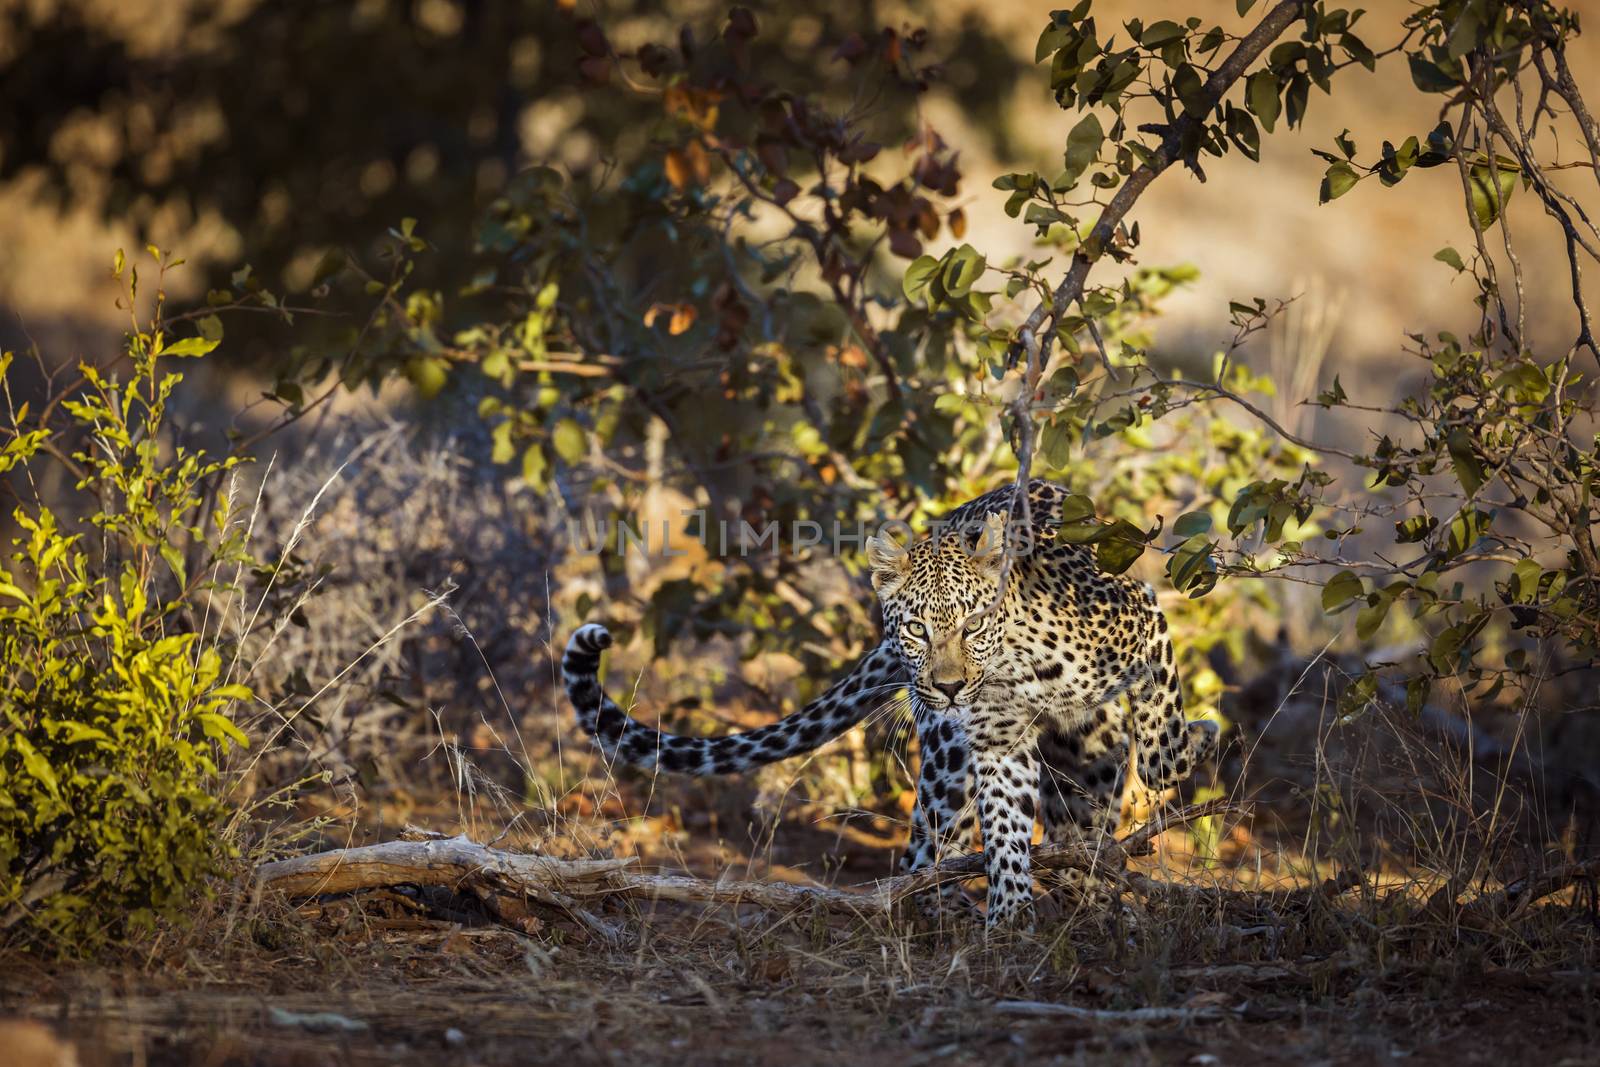 Leopard walking in front view in Kruger National park, South Africa ; Specie Panthera pardus family of Felidae